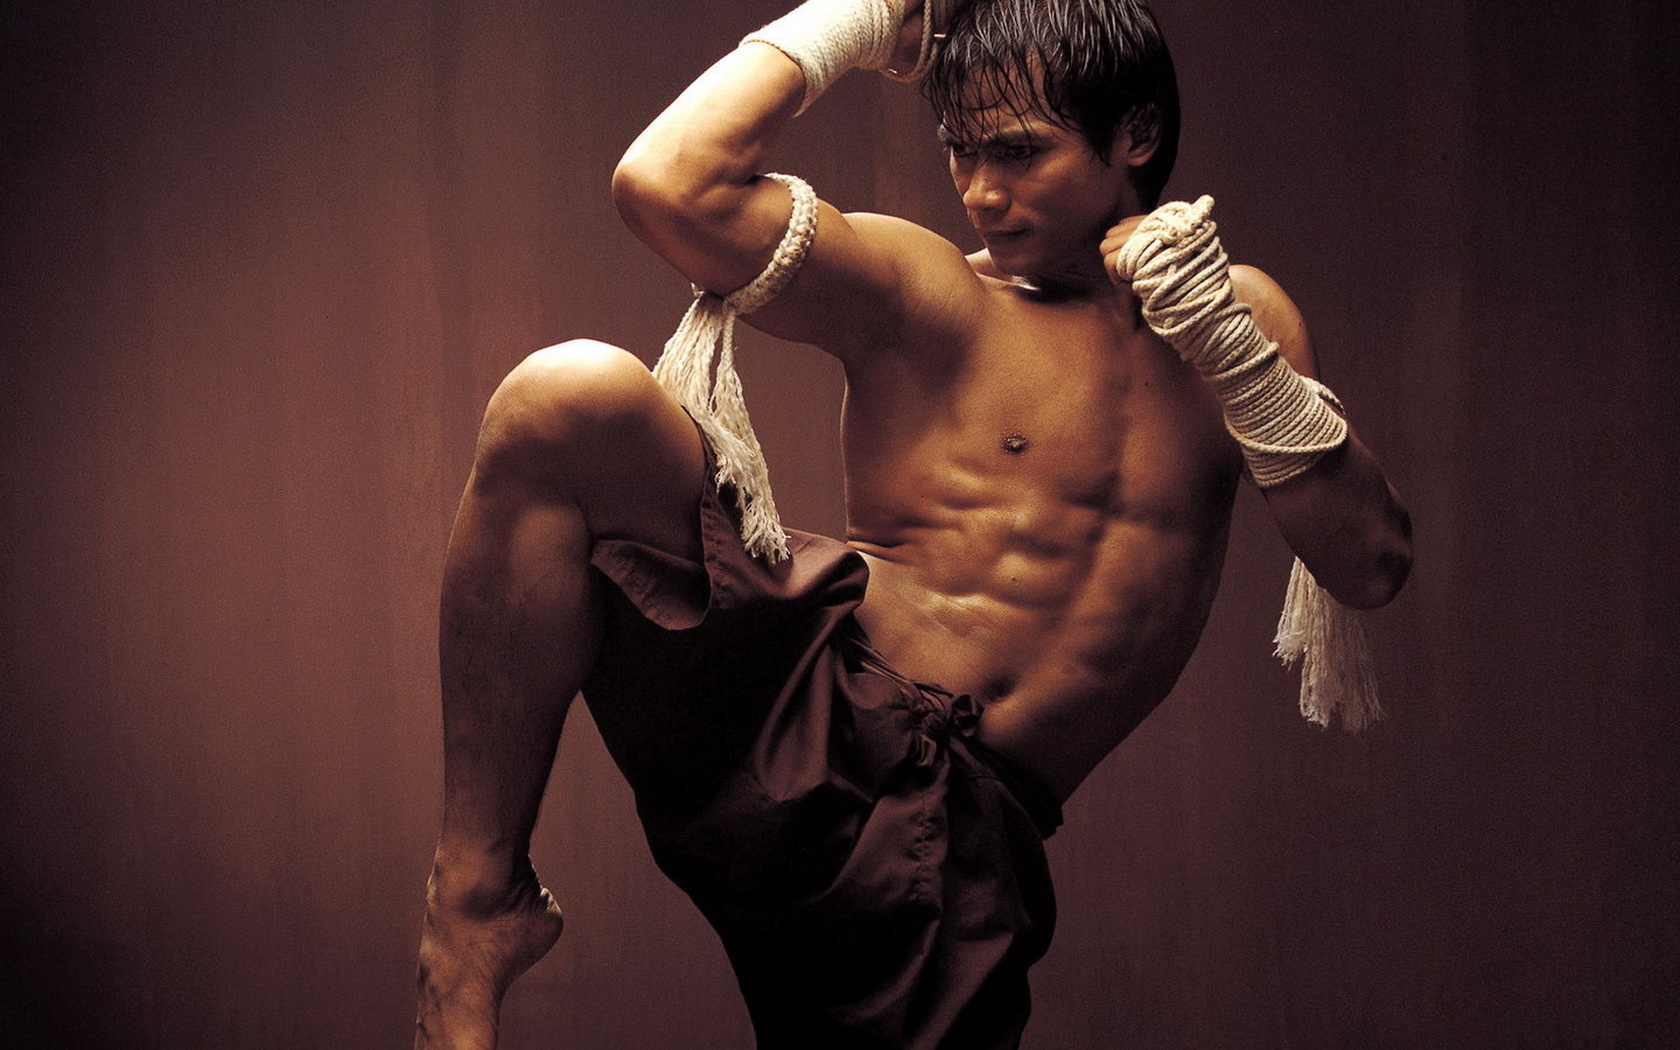 The Top Five Reasons to Learn Muay Thai - Martial Arts Guy